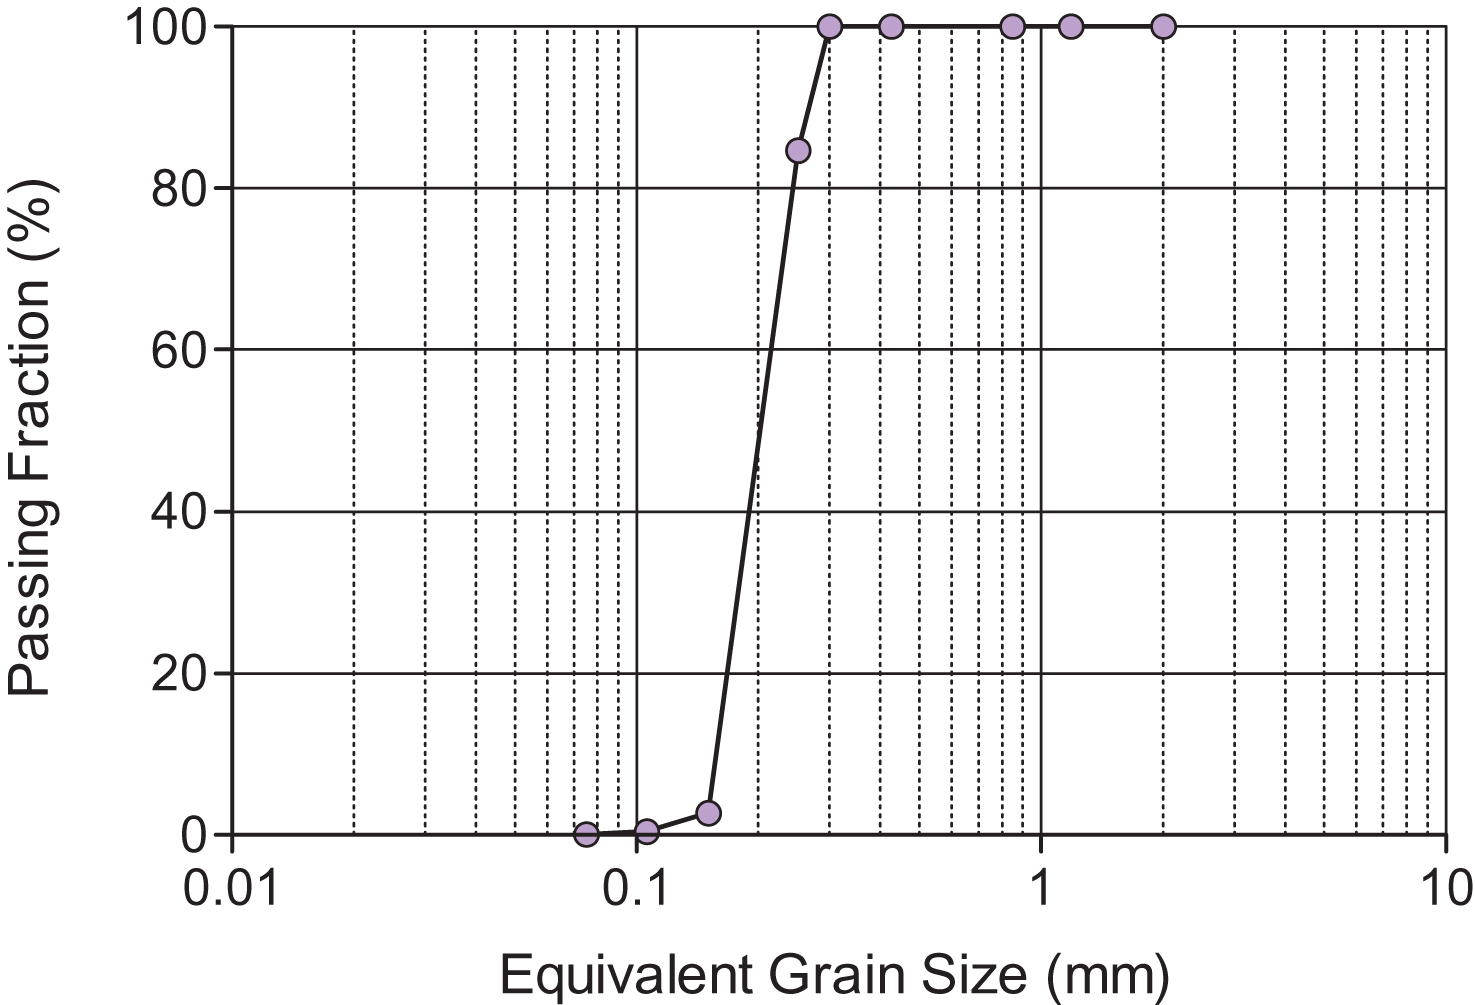 Grain size distribution of Toyoura sand.